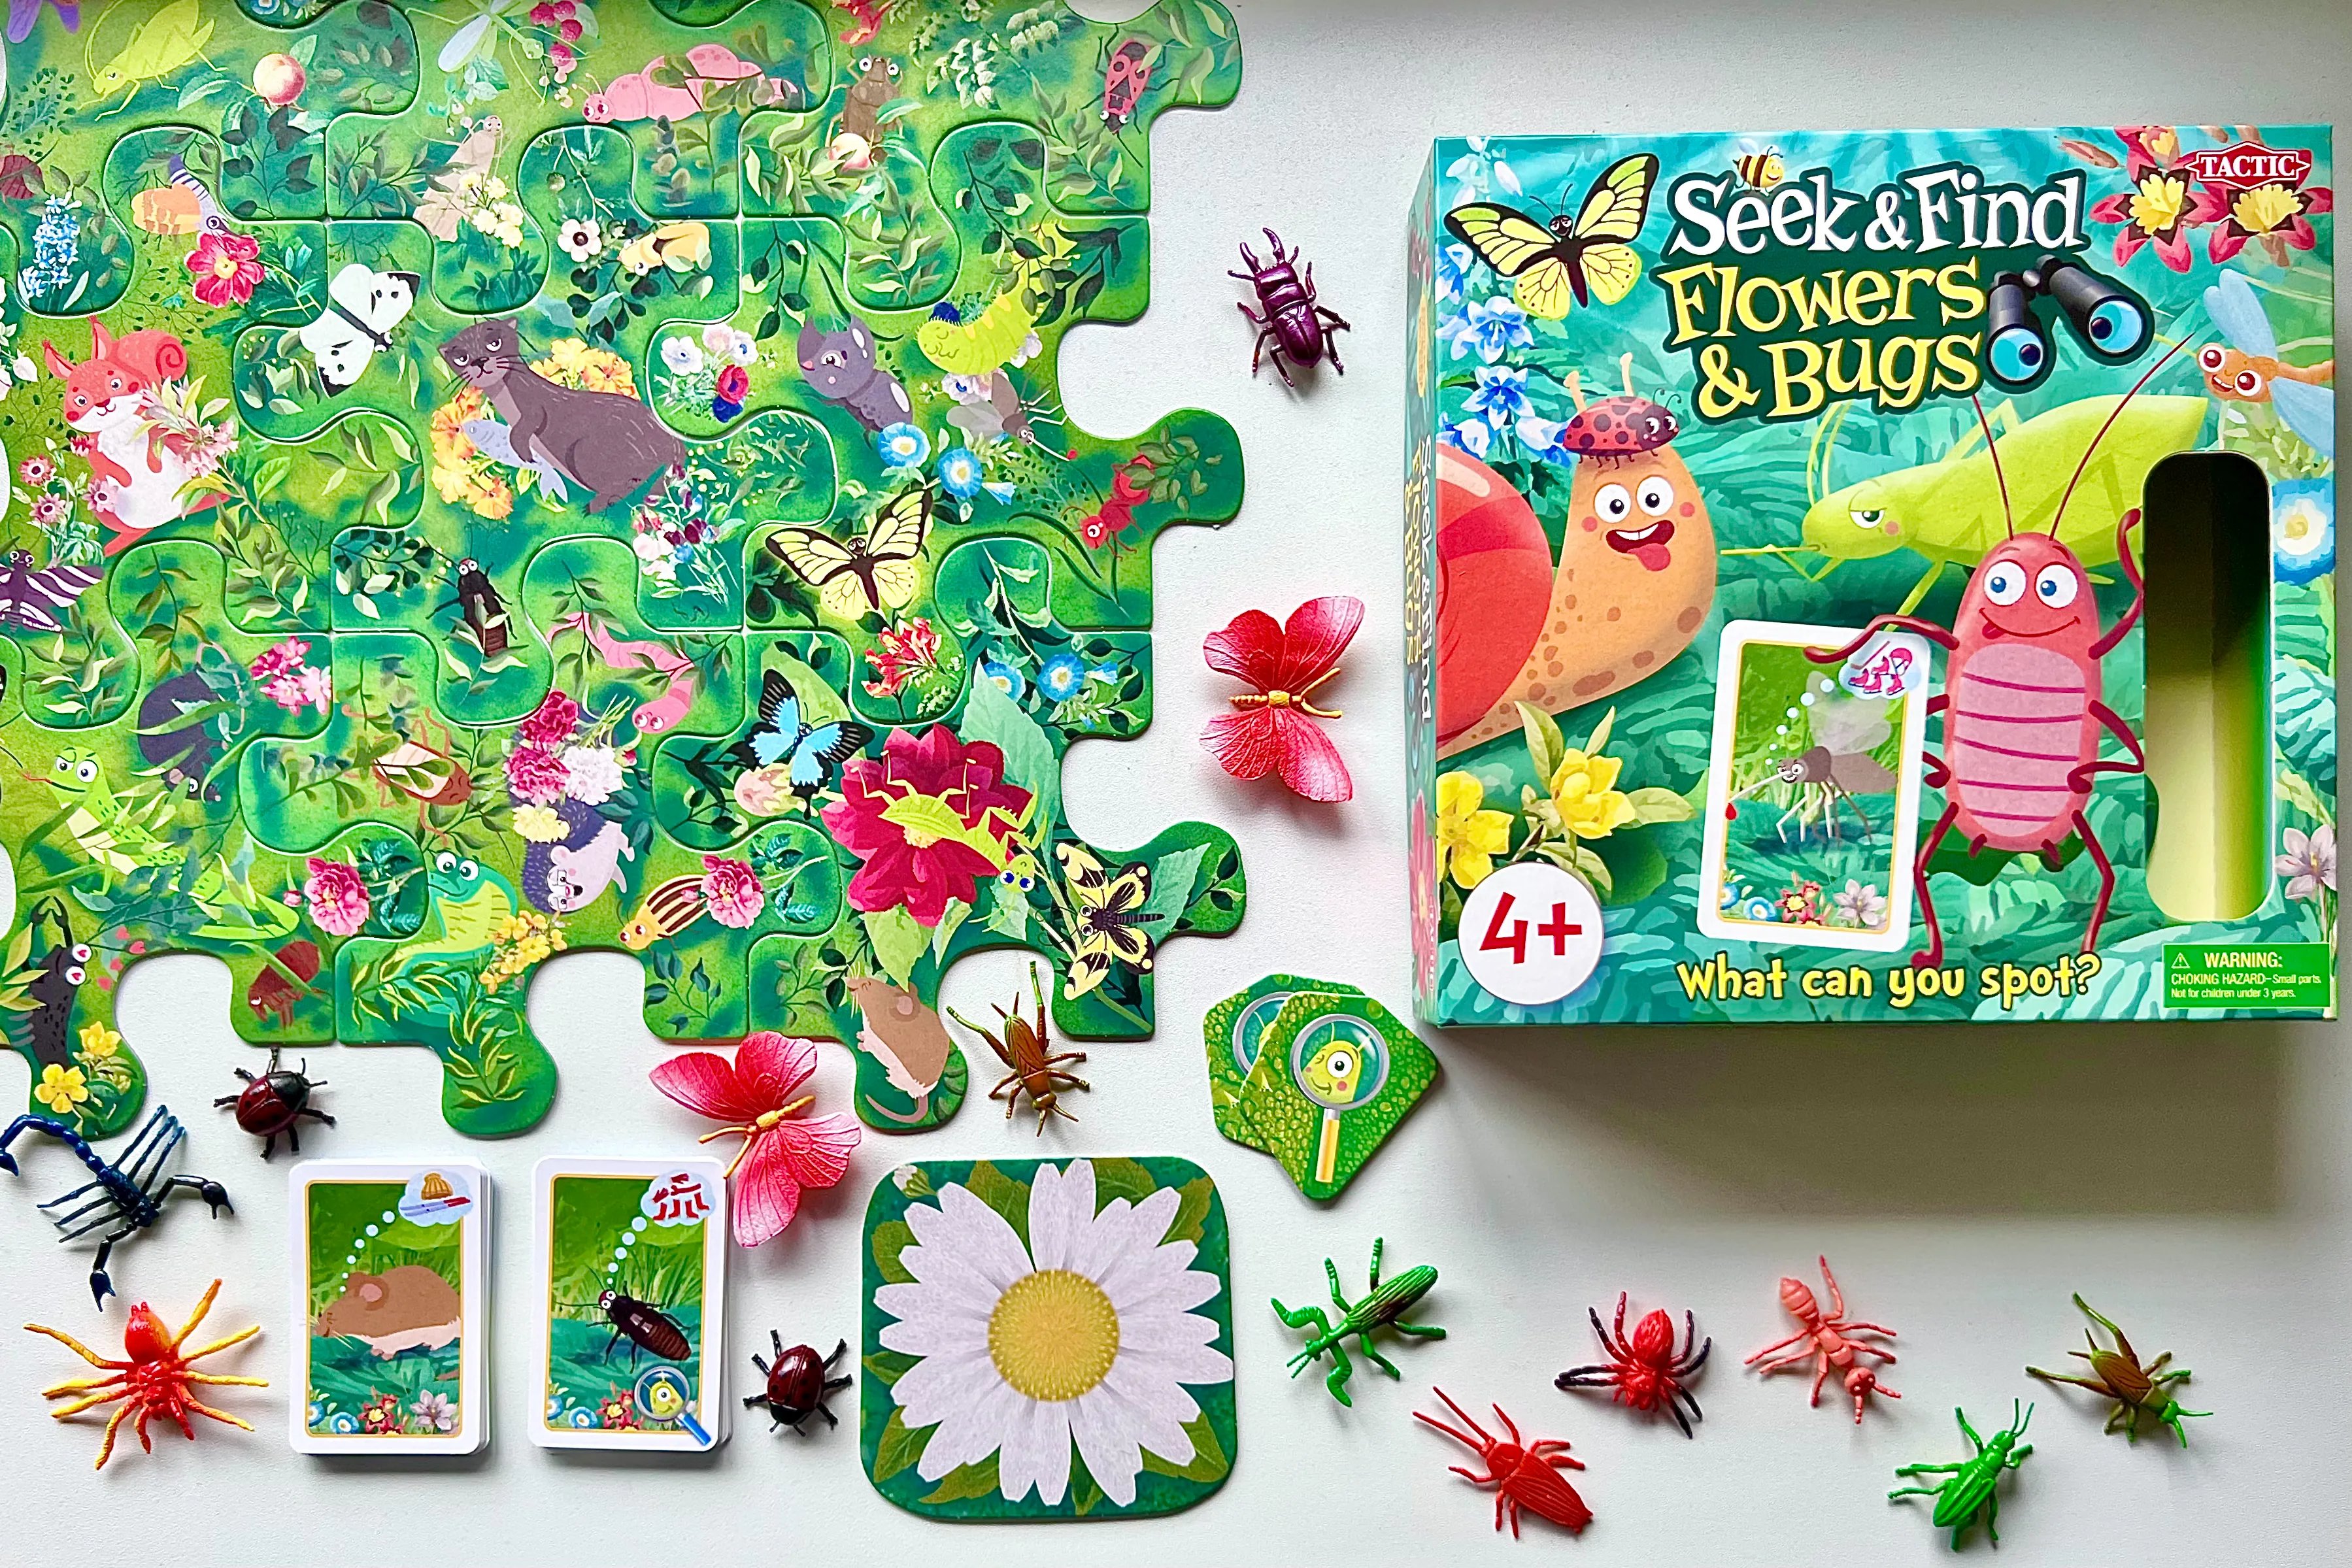 The Tactic Seek & Find game Flowers & Bugs version received to review and laid out on a table with the box